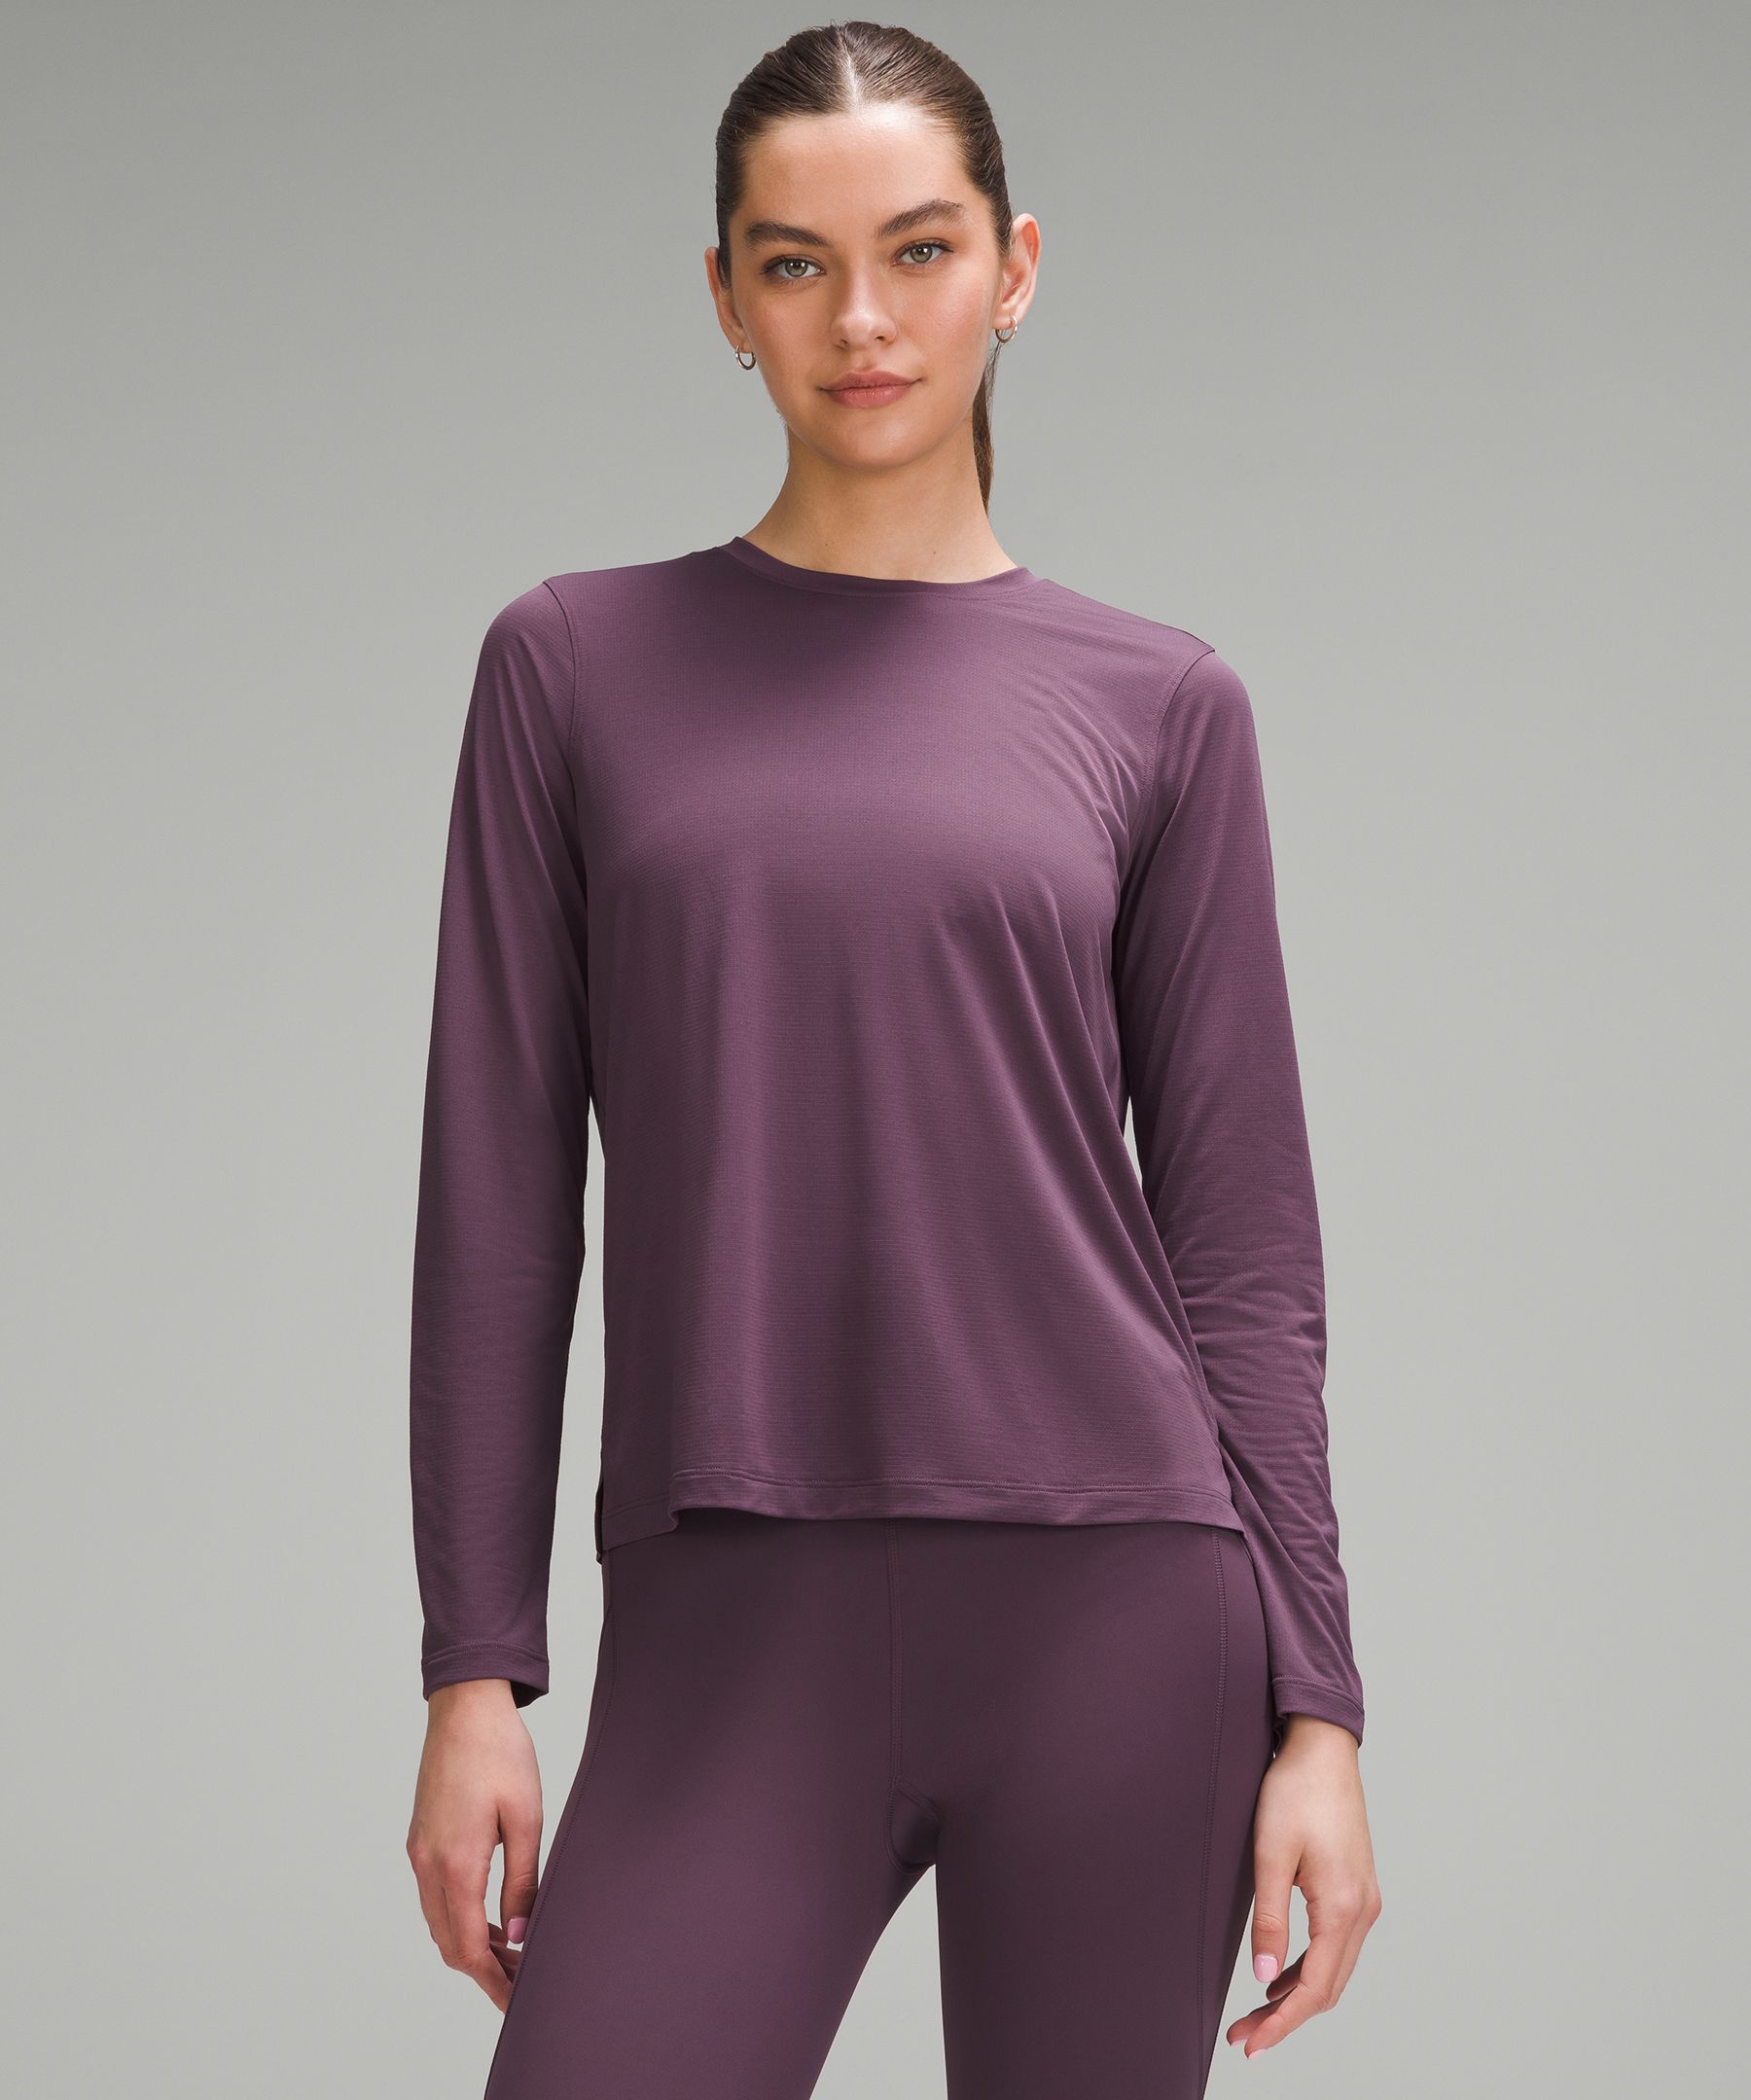 NWT SPLENDID asymmetric activewear long sleeves top Size Large workout top